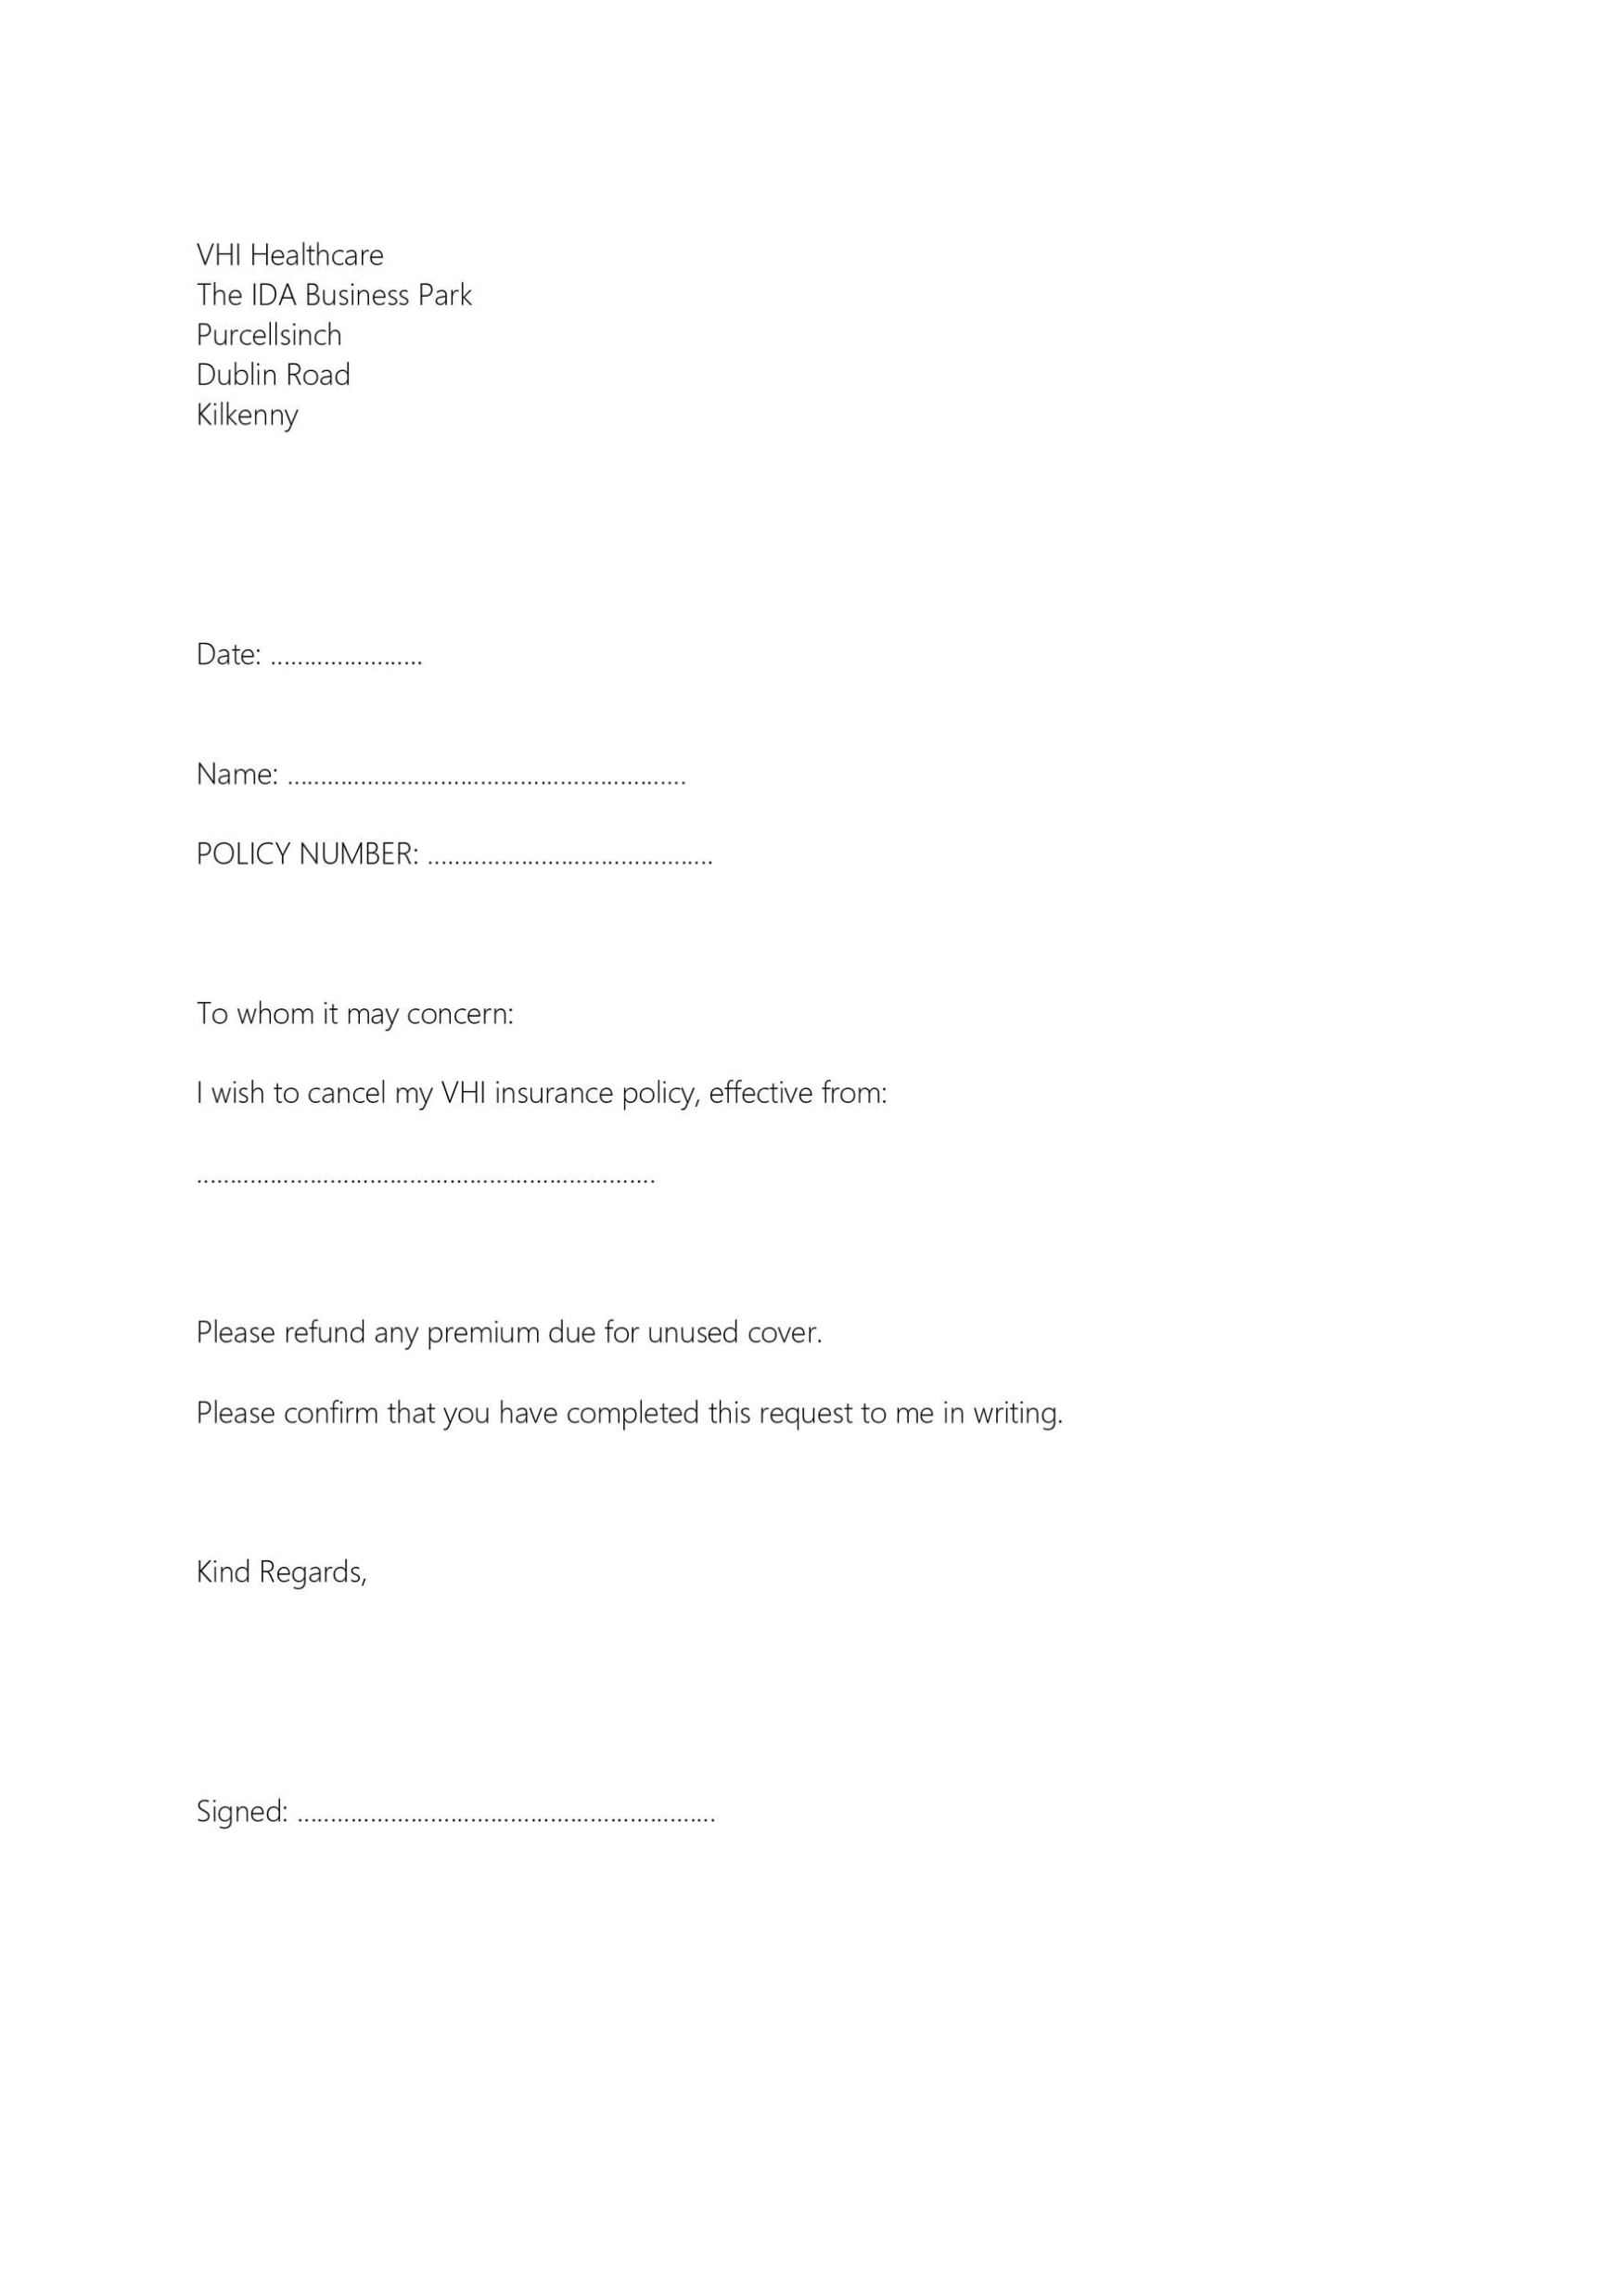 Fitness Connection Cancellation Letter Template - All Photos Fitness With Booking Cancellation Policy Template